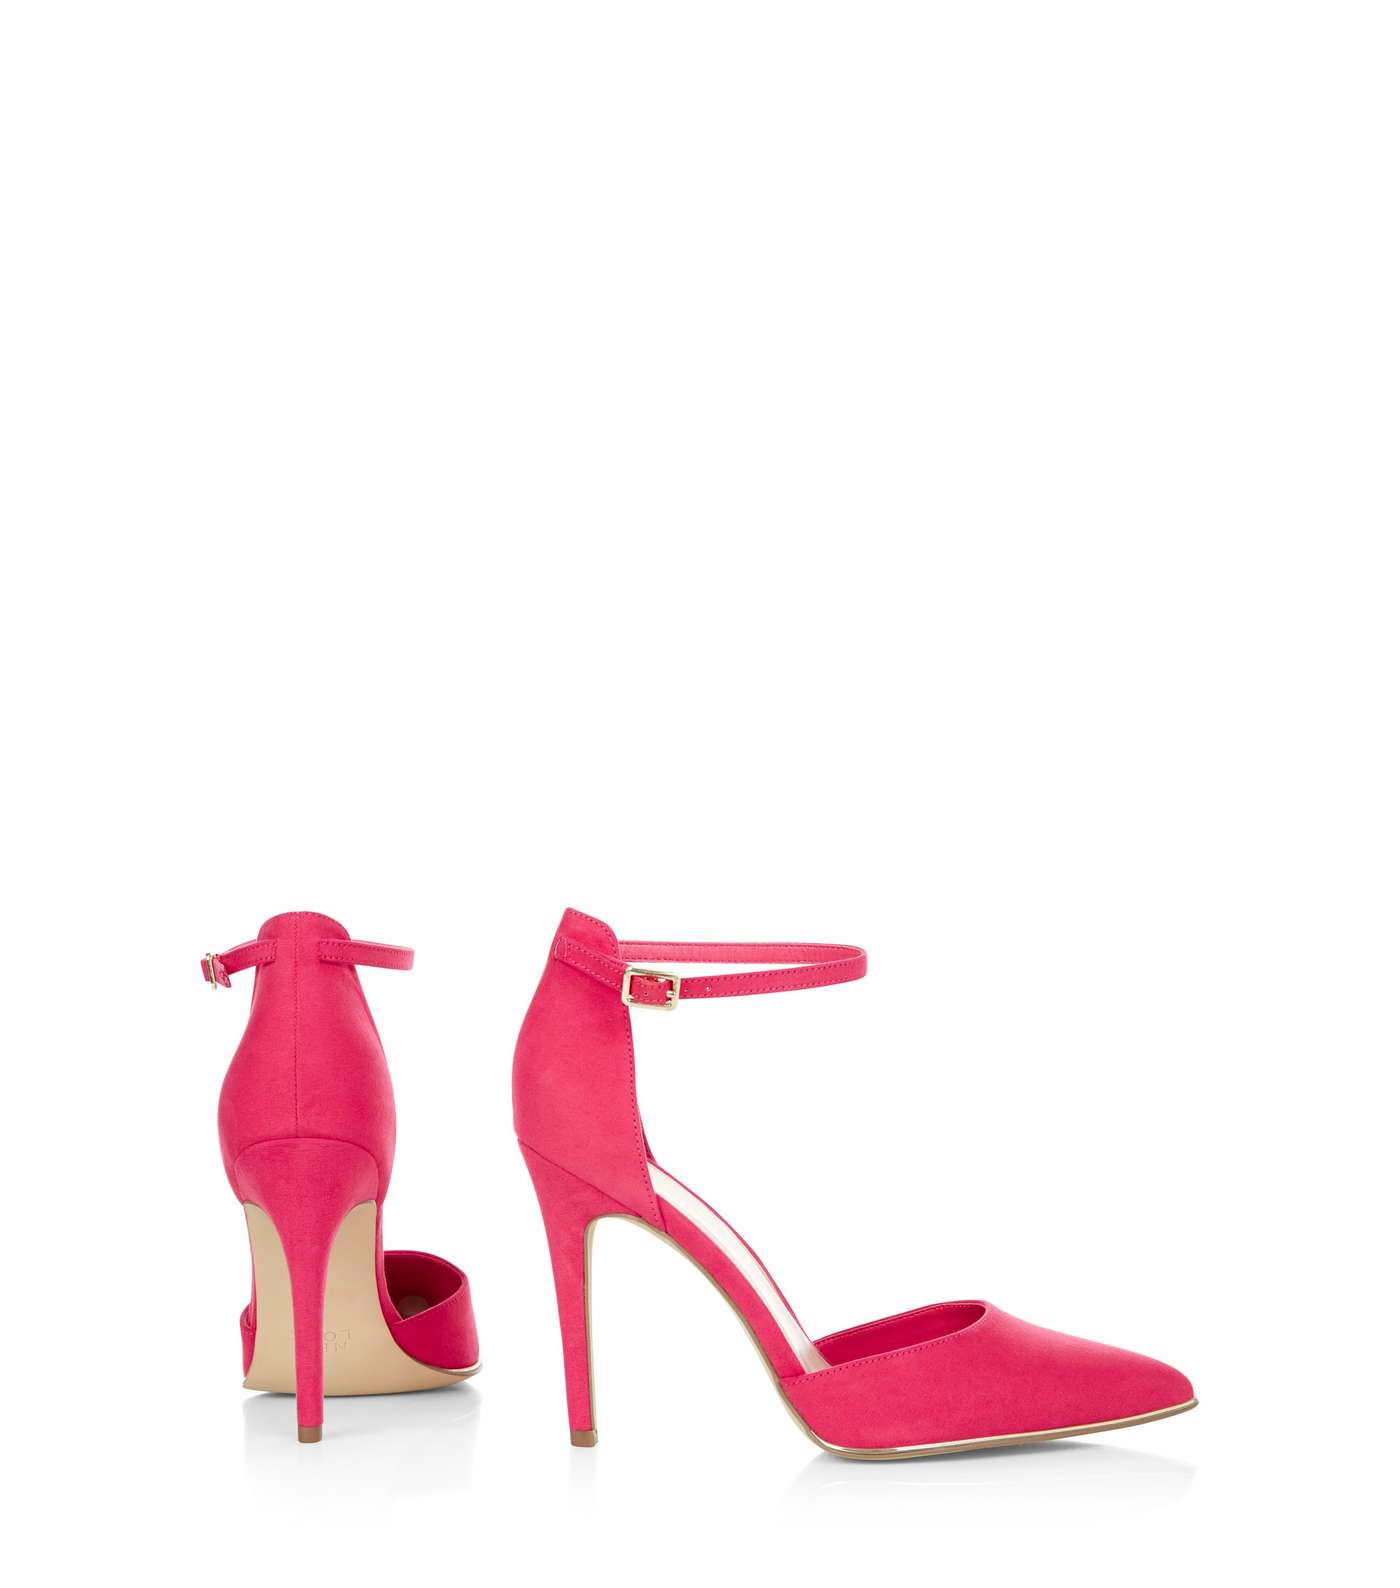 Wide Fit Bright Pink Suedette Ankle Strap Pointed Heels Image 3